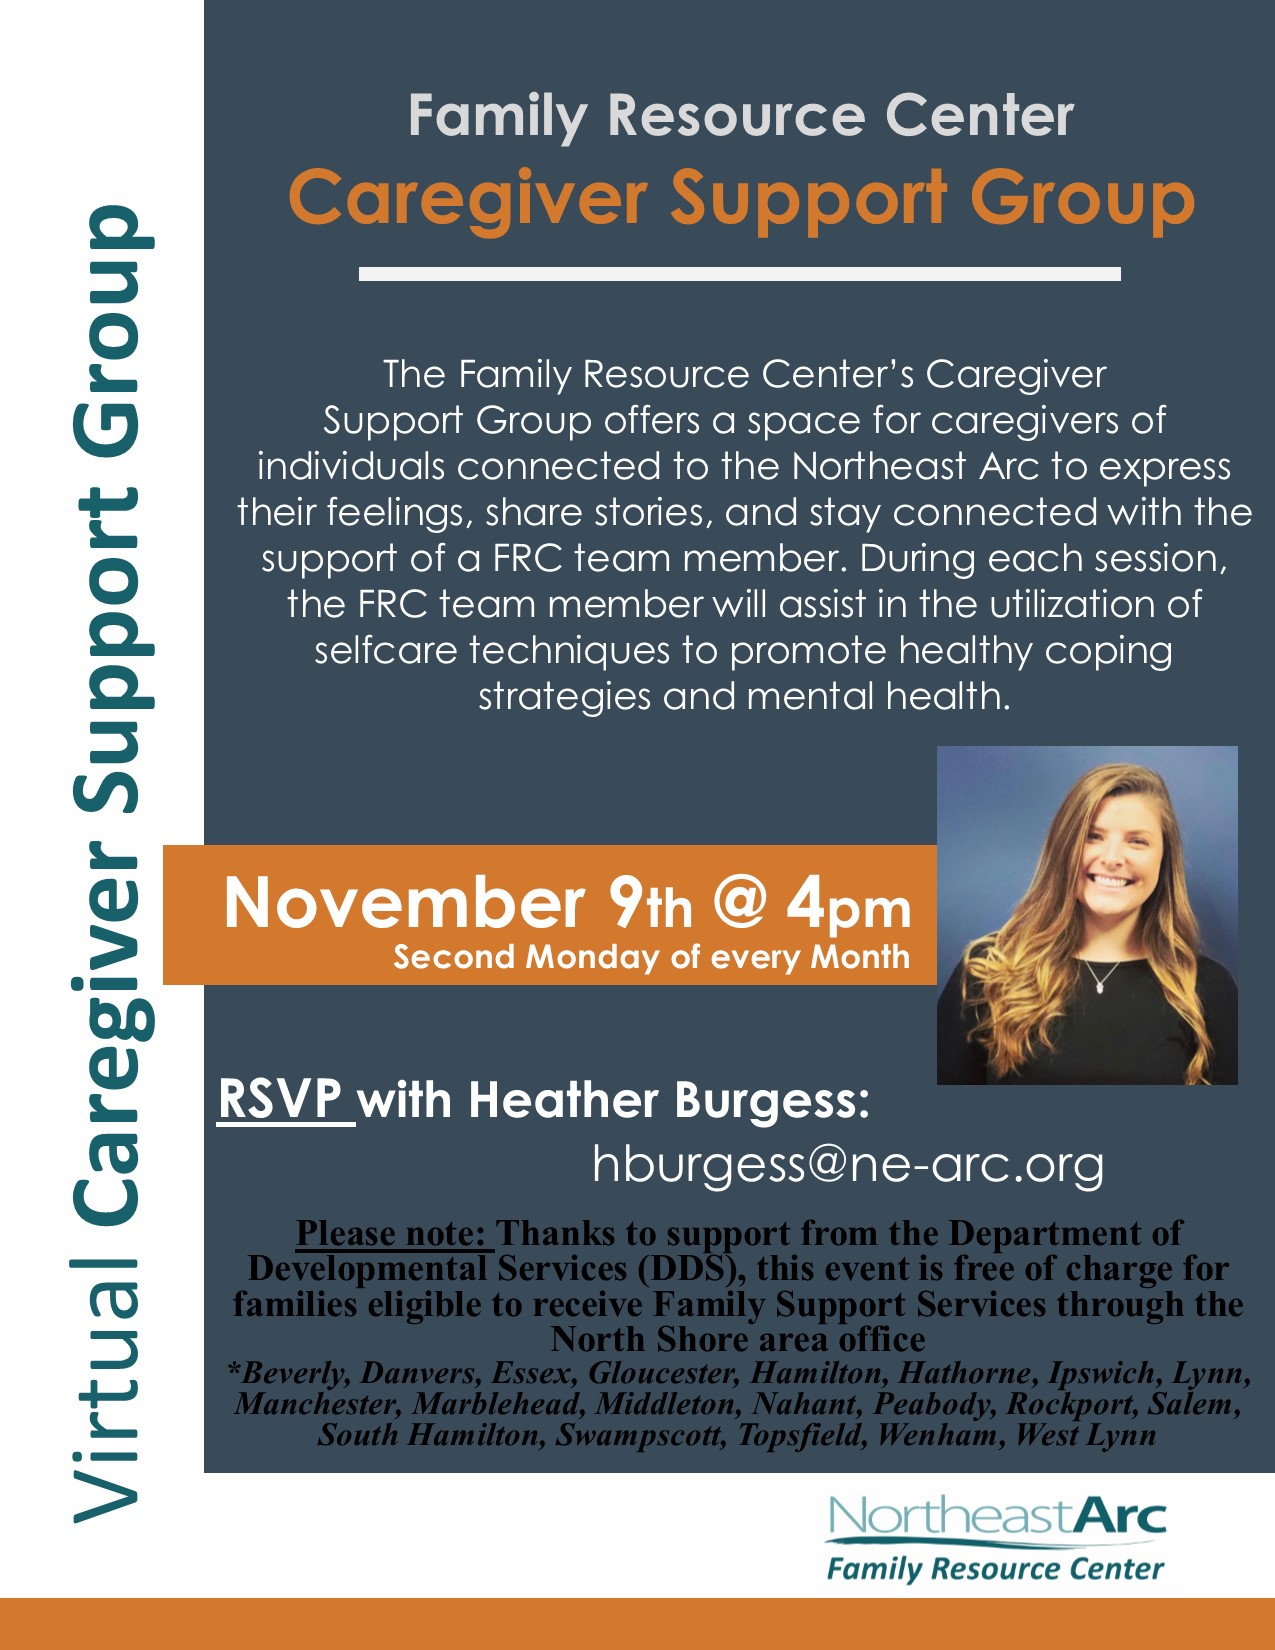 FRC Virtual Caregiver Support Group, second Monday of every Month, 4 pm, RSVP at hburgess@ne-arc.org